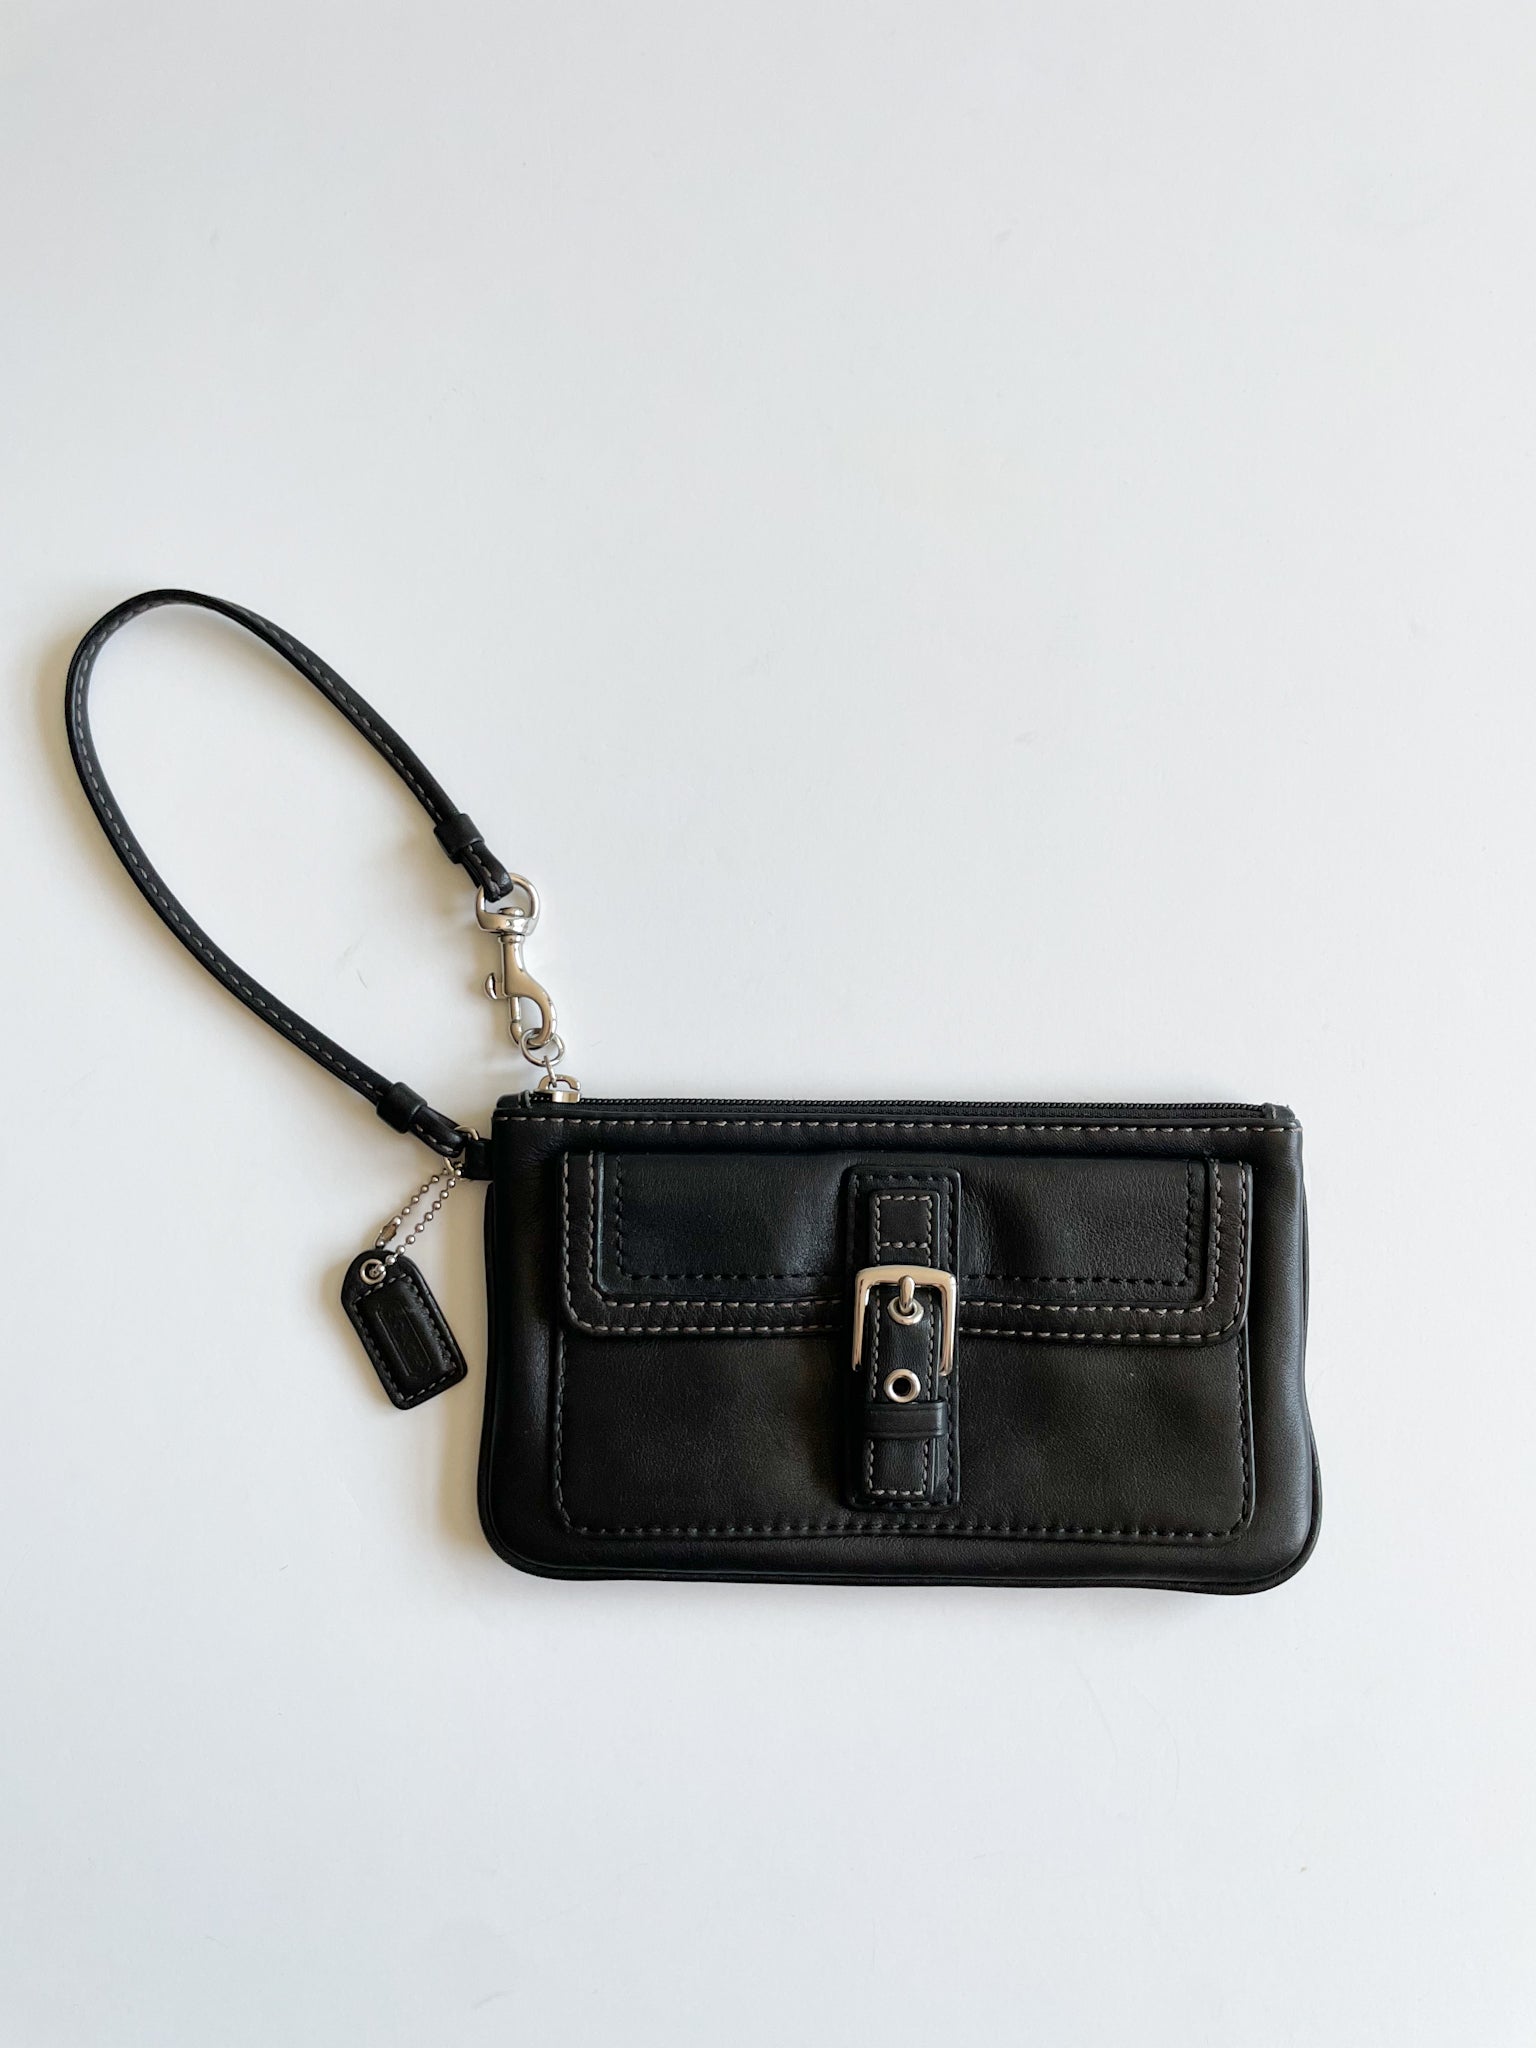 Coach Park Leather Small Wristlet Black NWT This Coach wristlet features a  zipper pocket that also functions as a wristlet strap. …